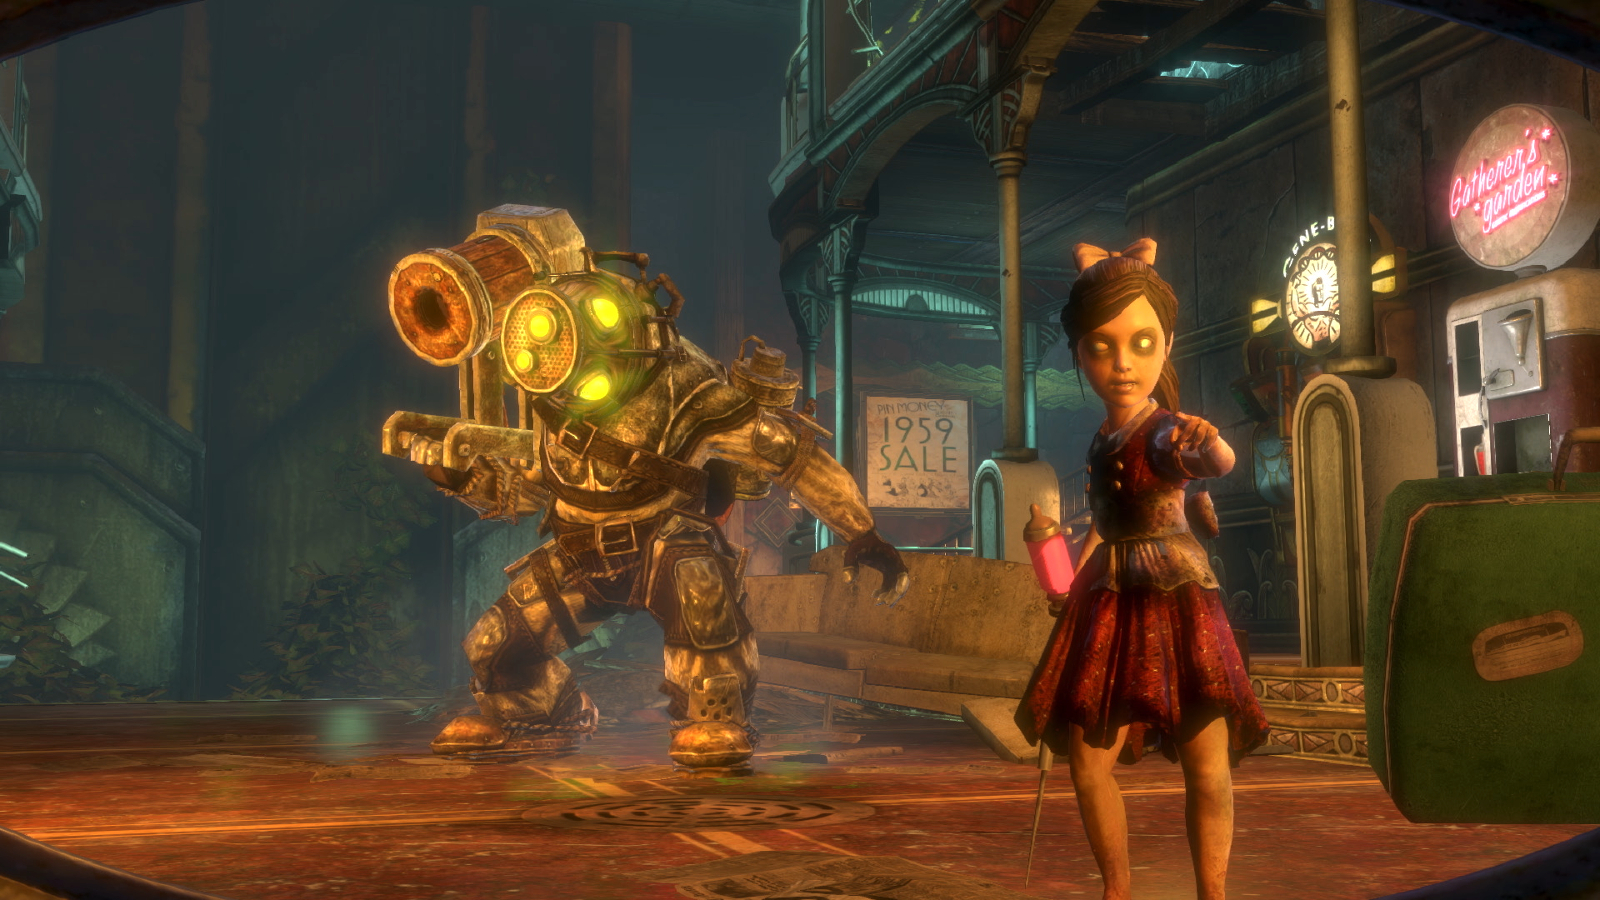  Bioshock: The Collection (PS4) : Video Games